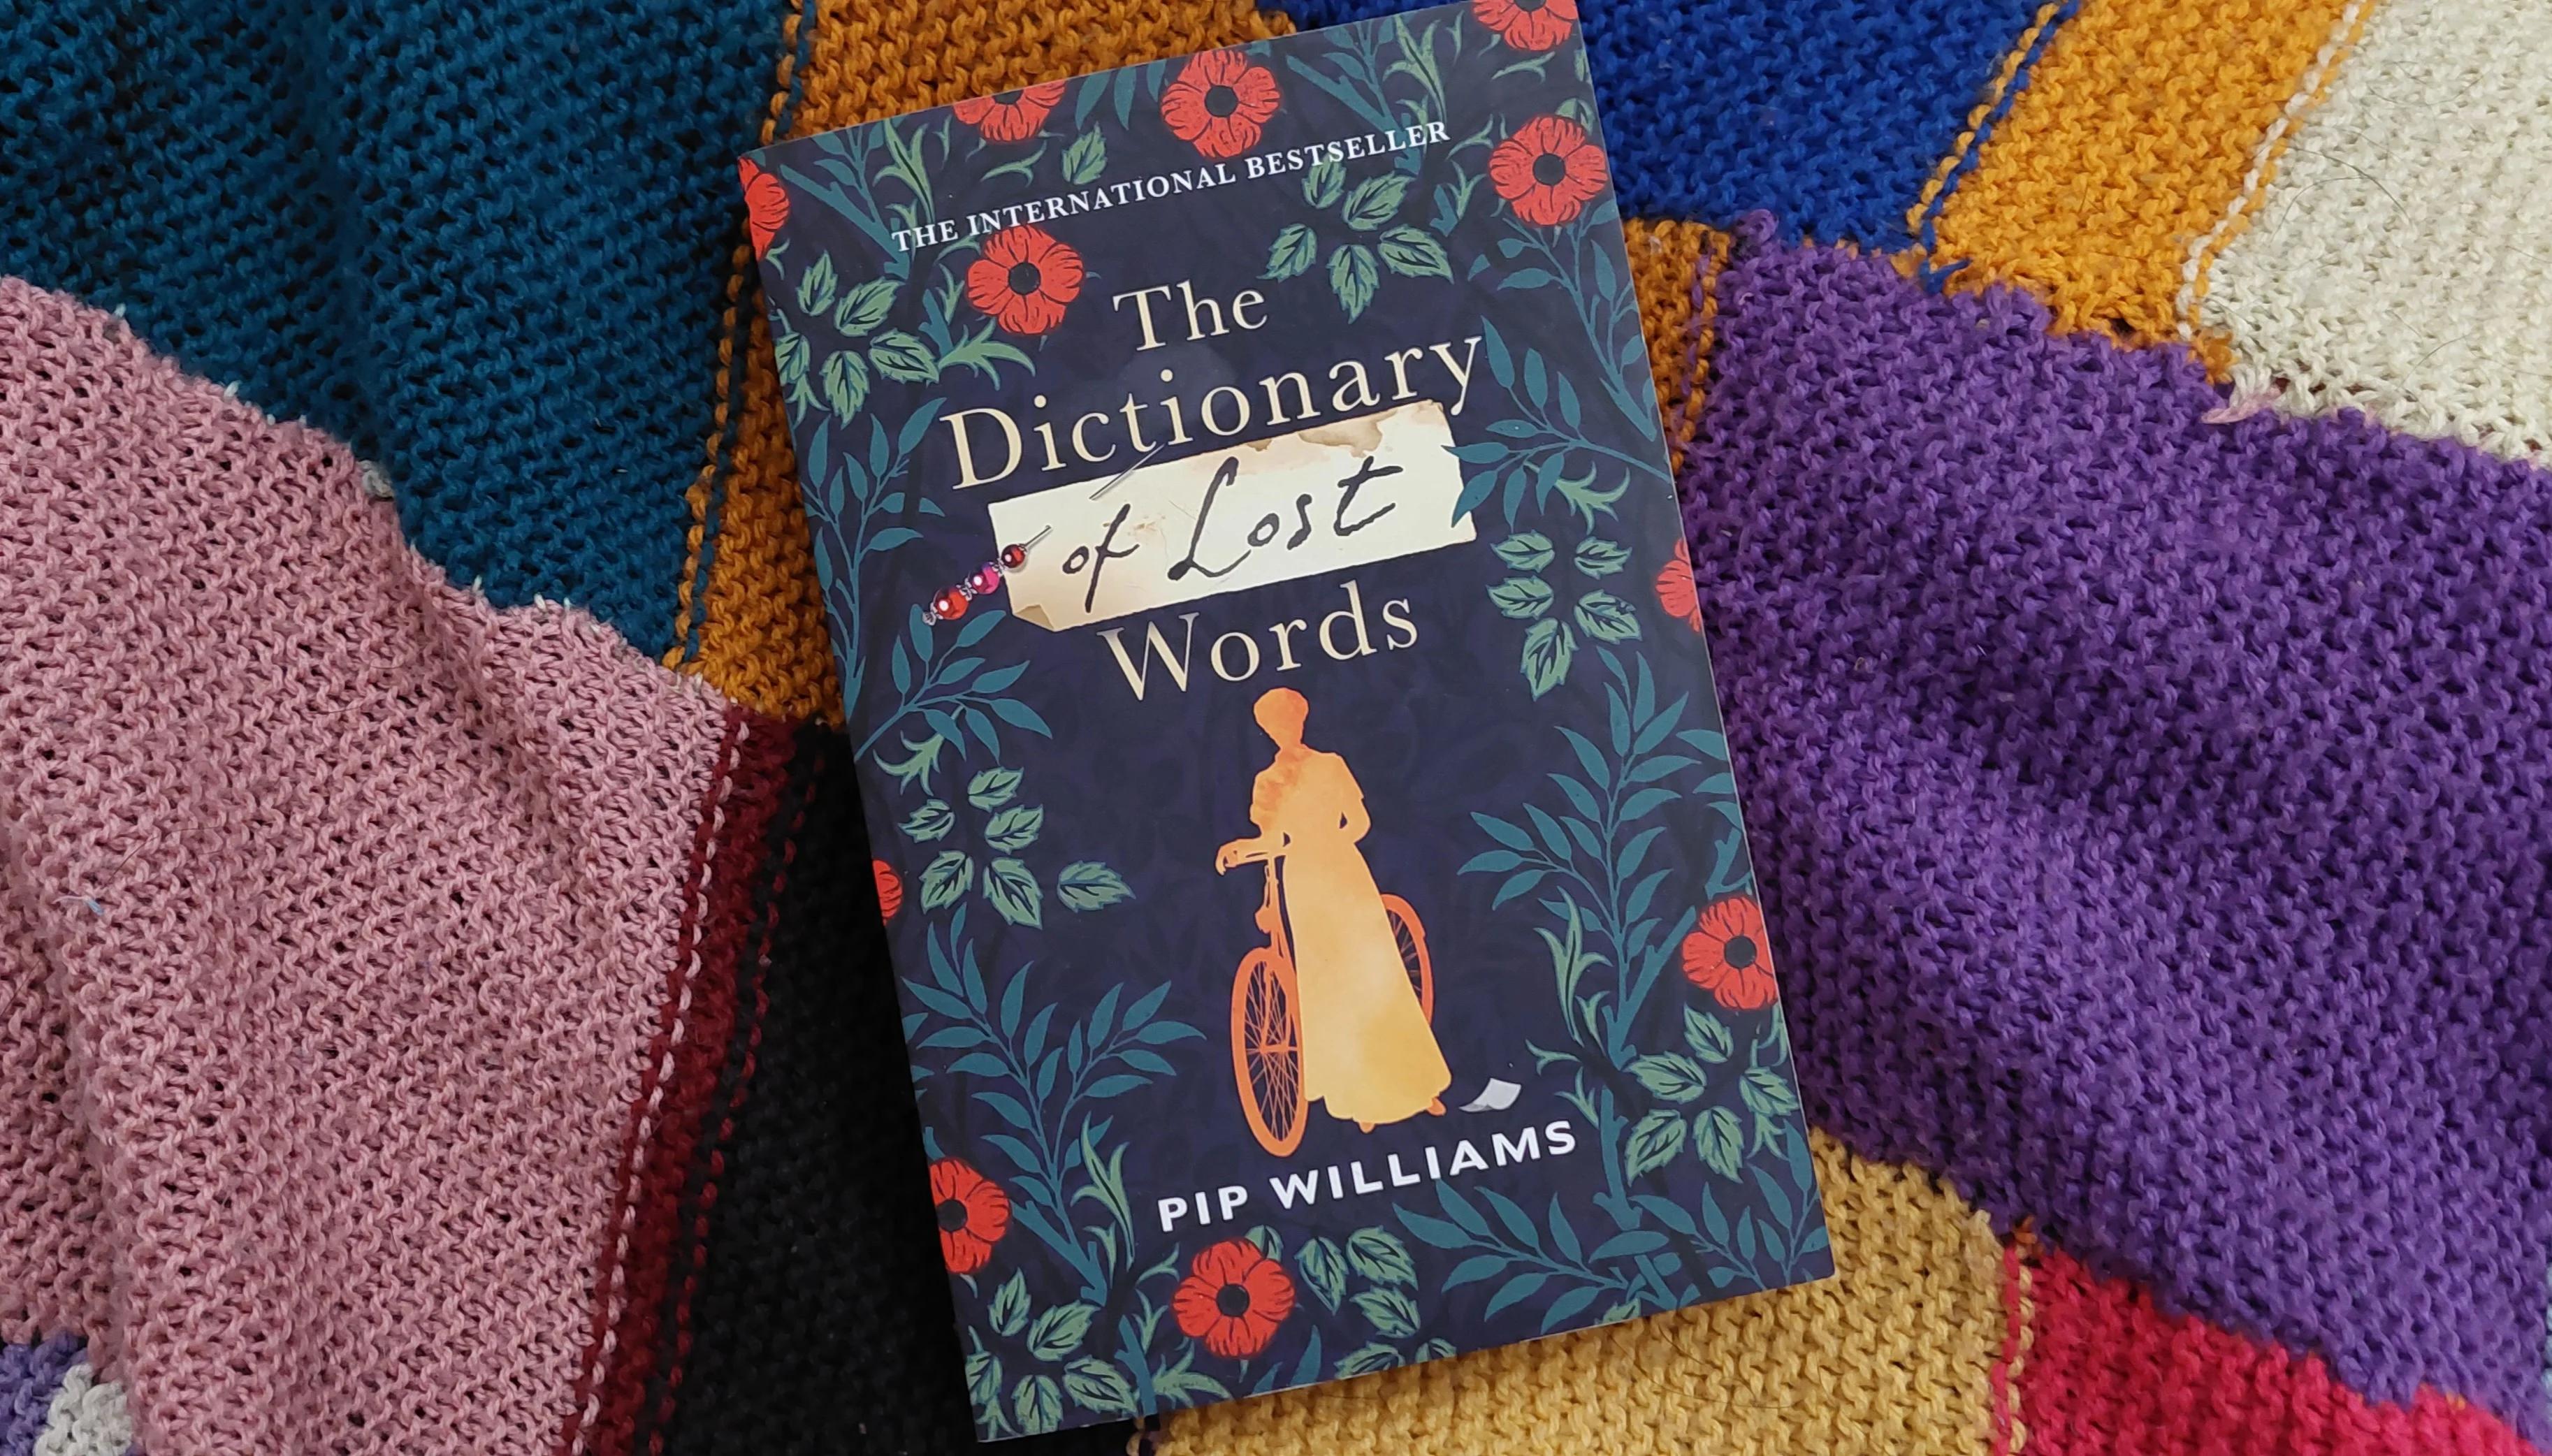 Book Review: The Dictionary of Lost Words